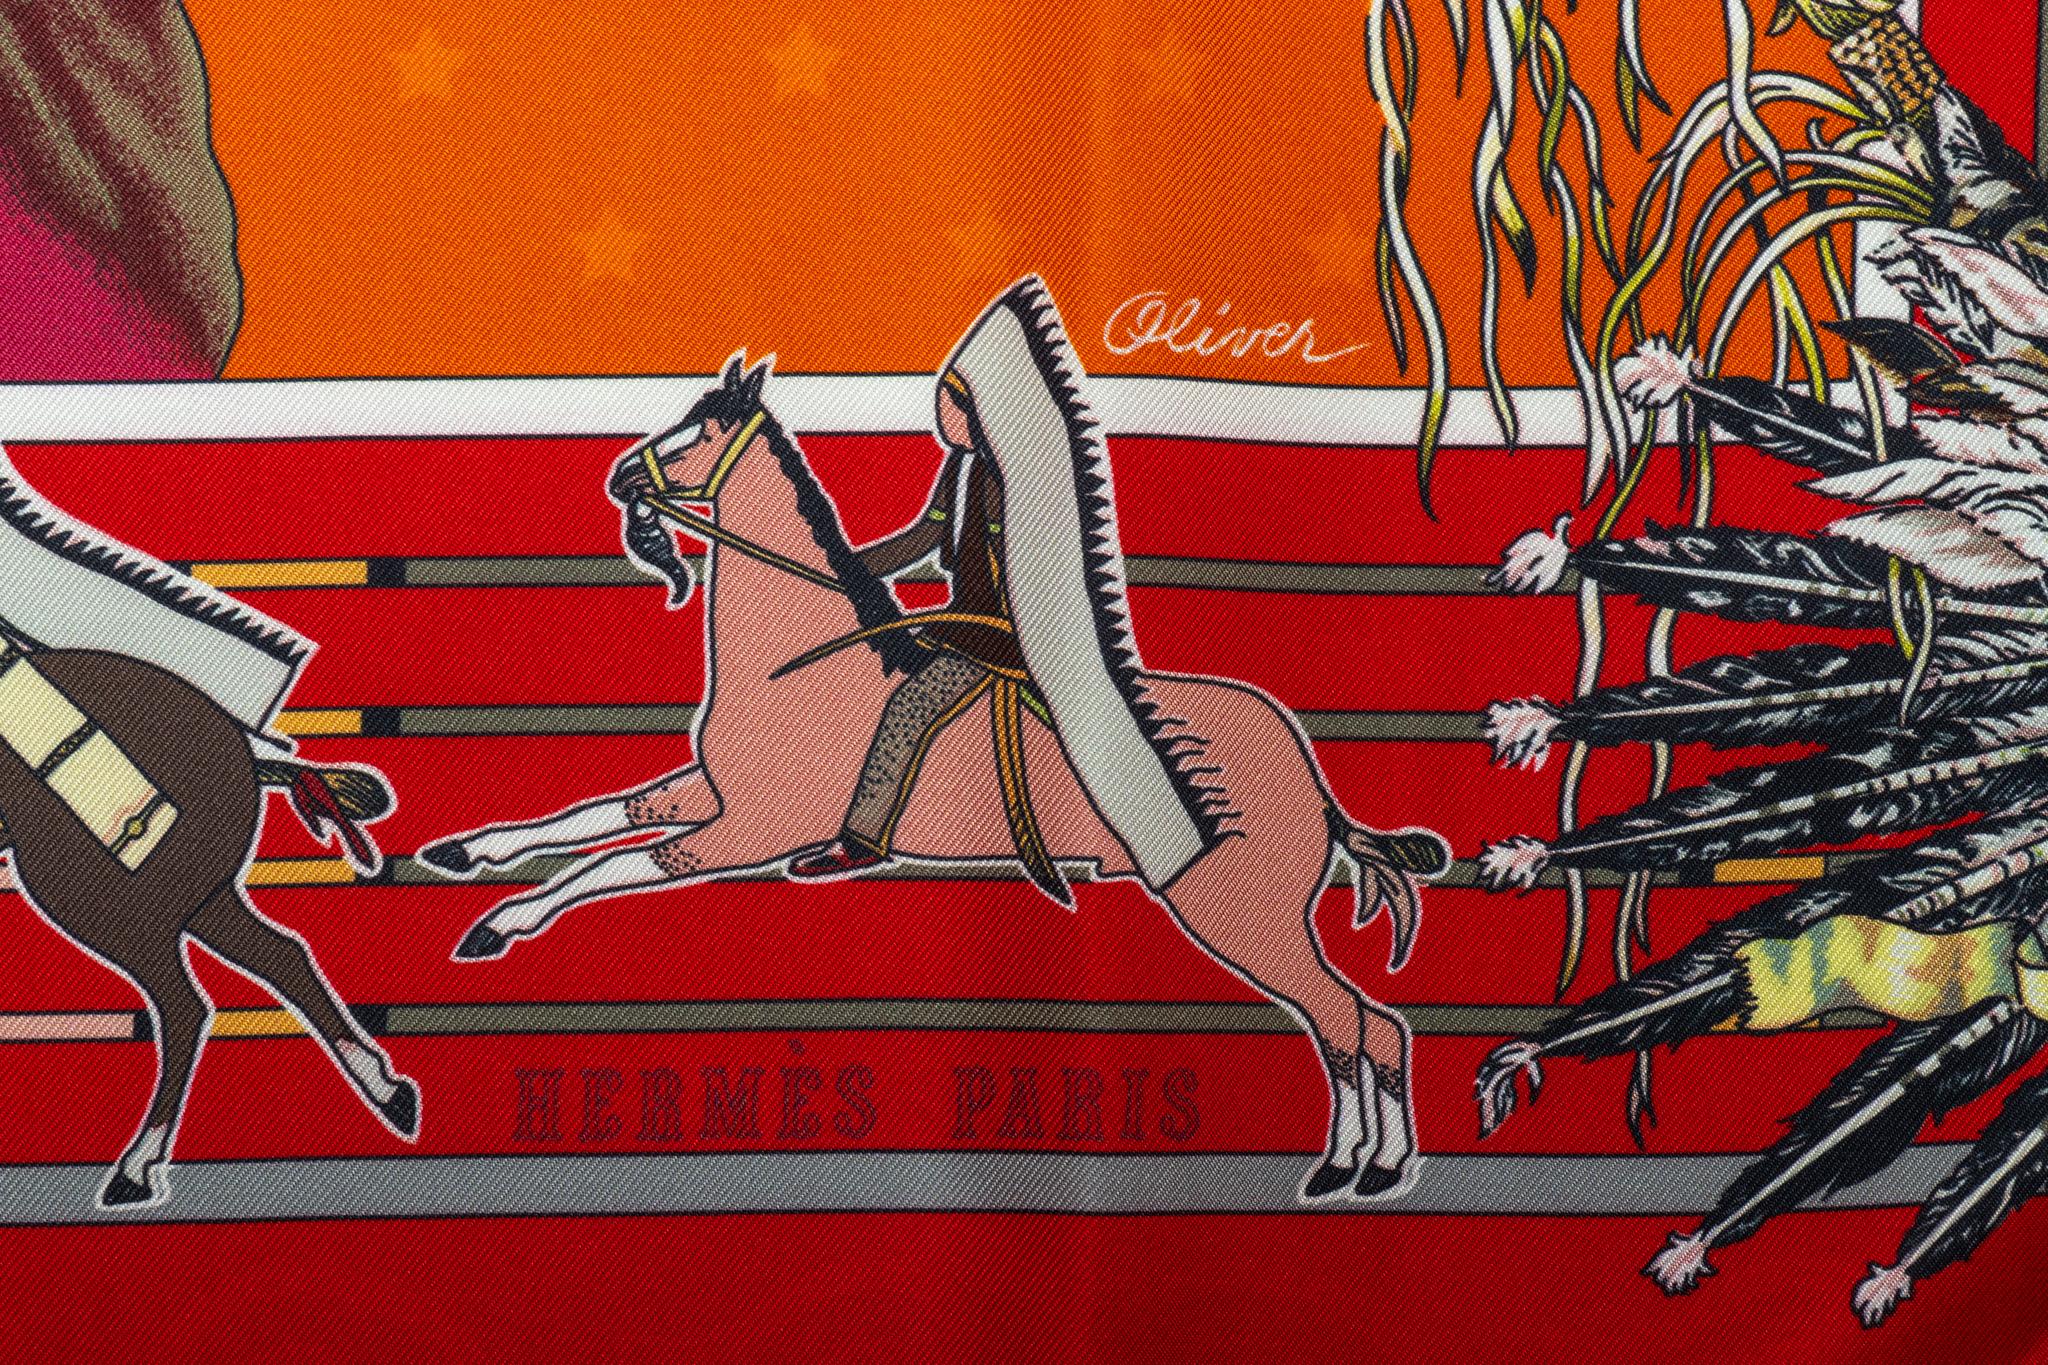 Hermès silk twill Pani La Shar Pawnee 90cm scarf in red with orange color. Designed by artist Kermit Oliver. Limited edition reissue 